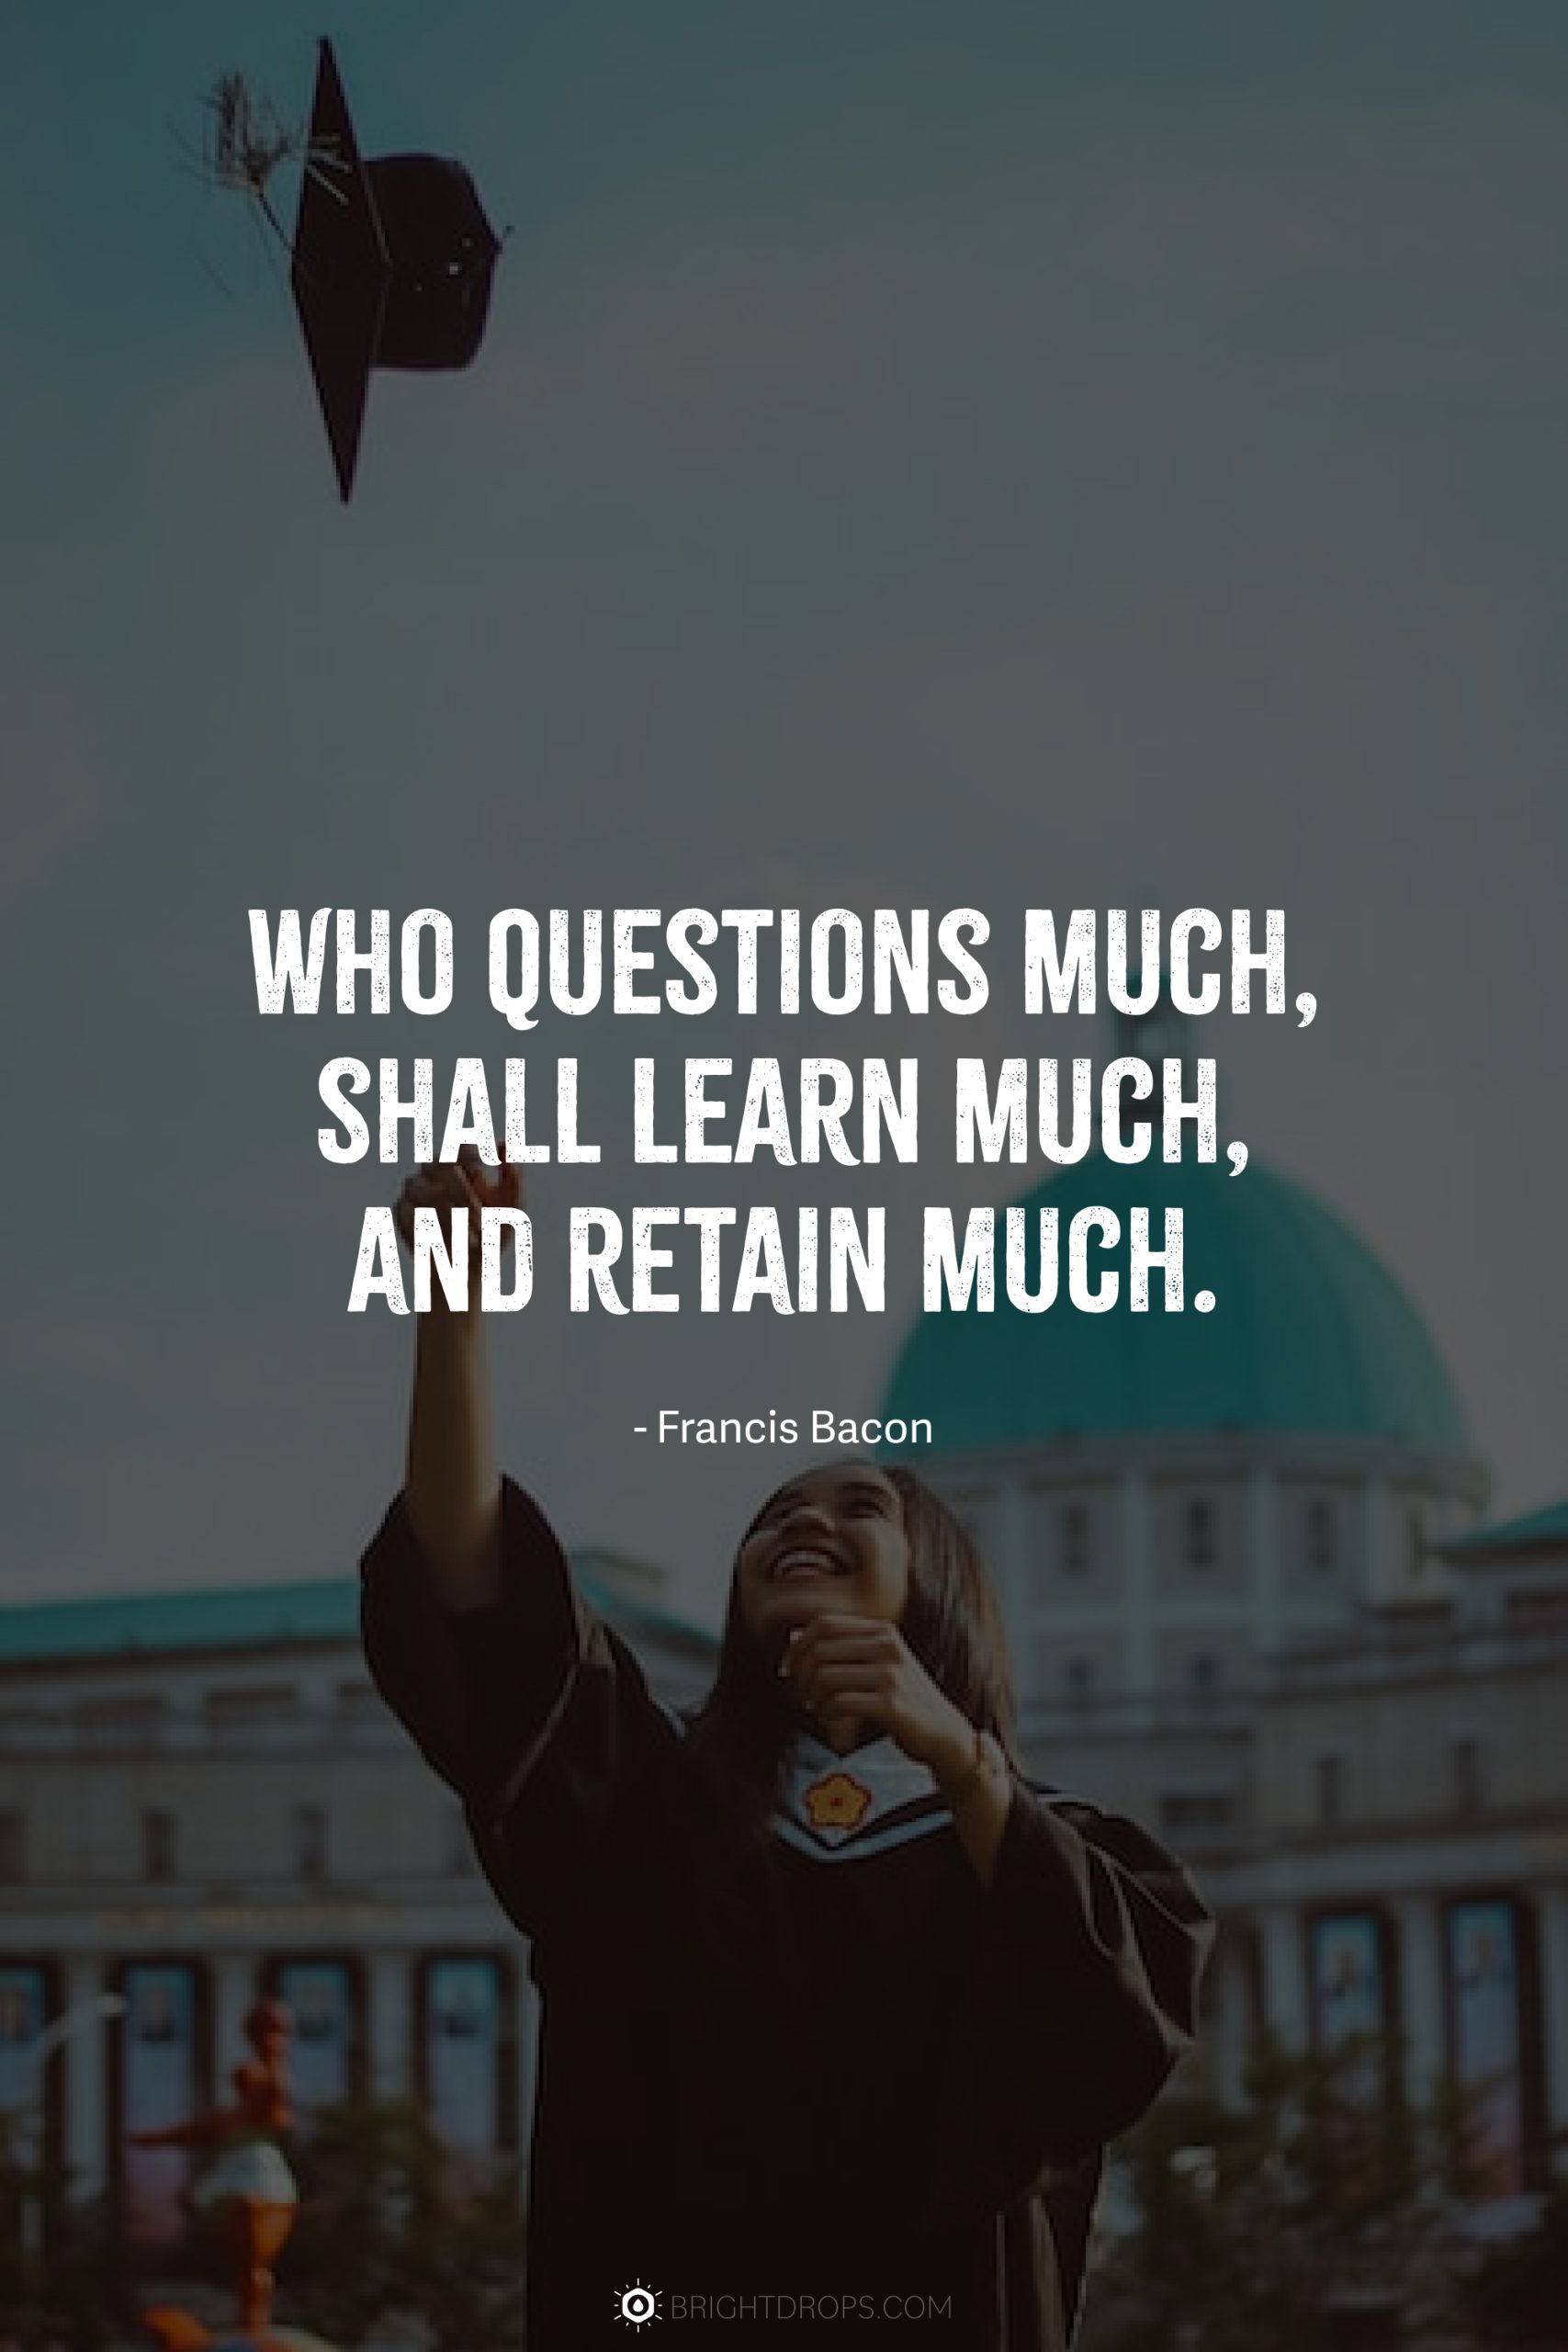 Who questions much, shall learn much, and retain much.